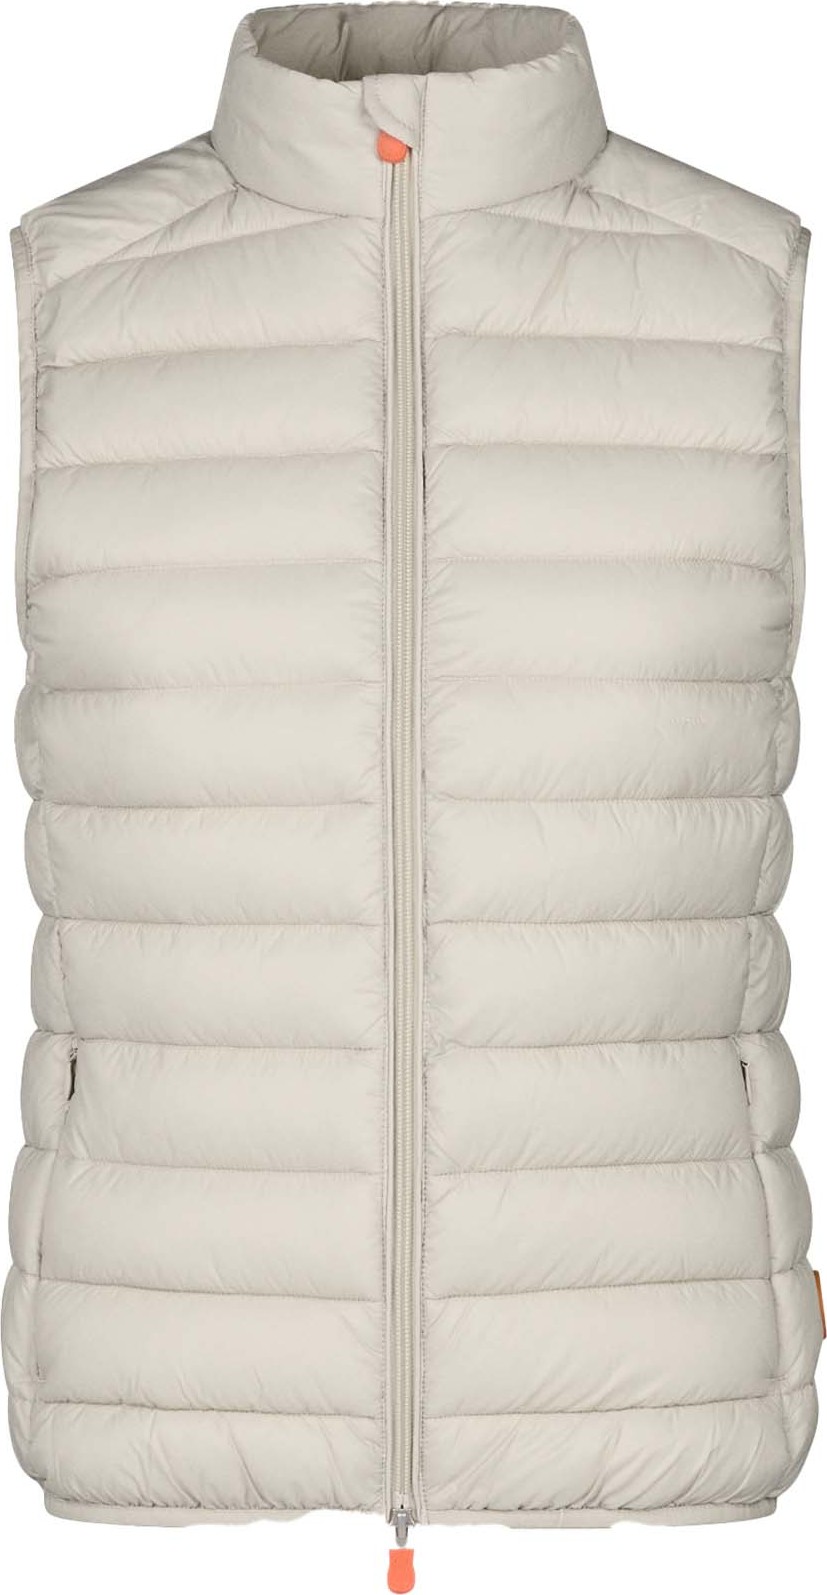 Save the Duck Save the Duck Women's quilted Gilet Charlotte Rainy Beige L, Rainy Beige